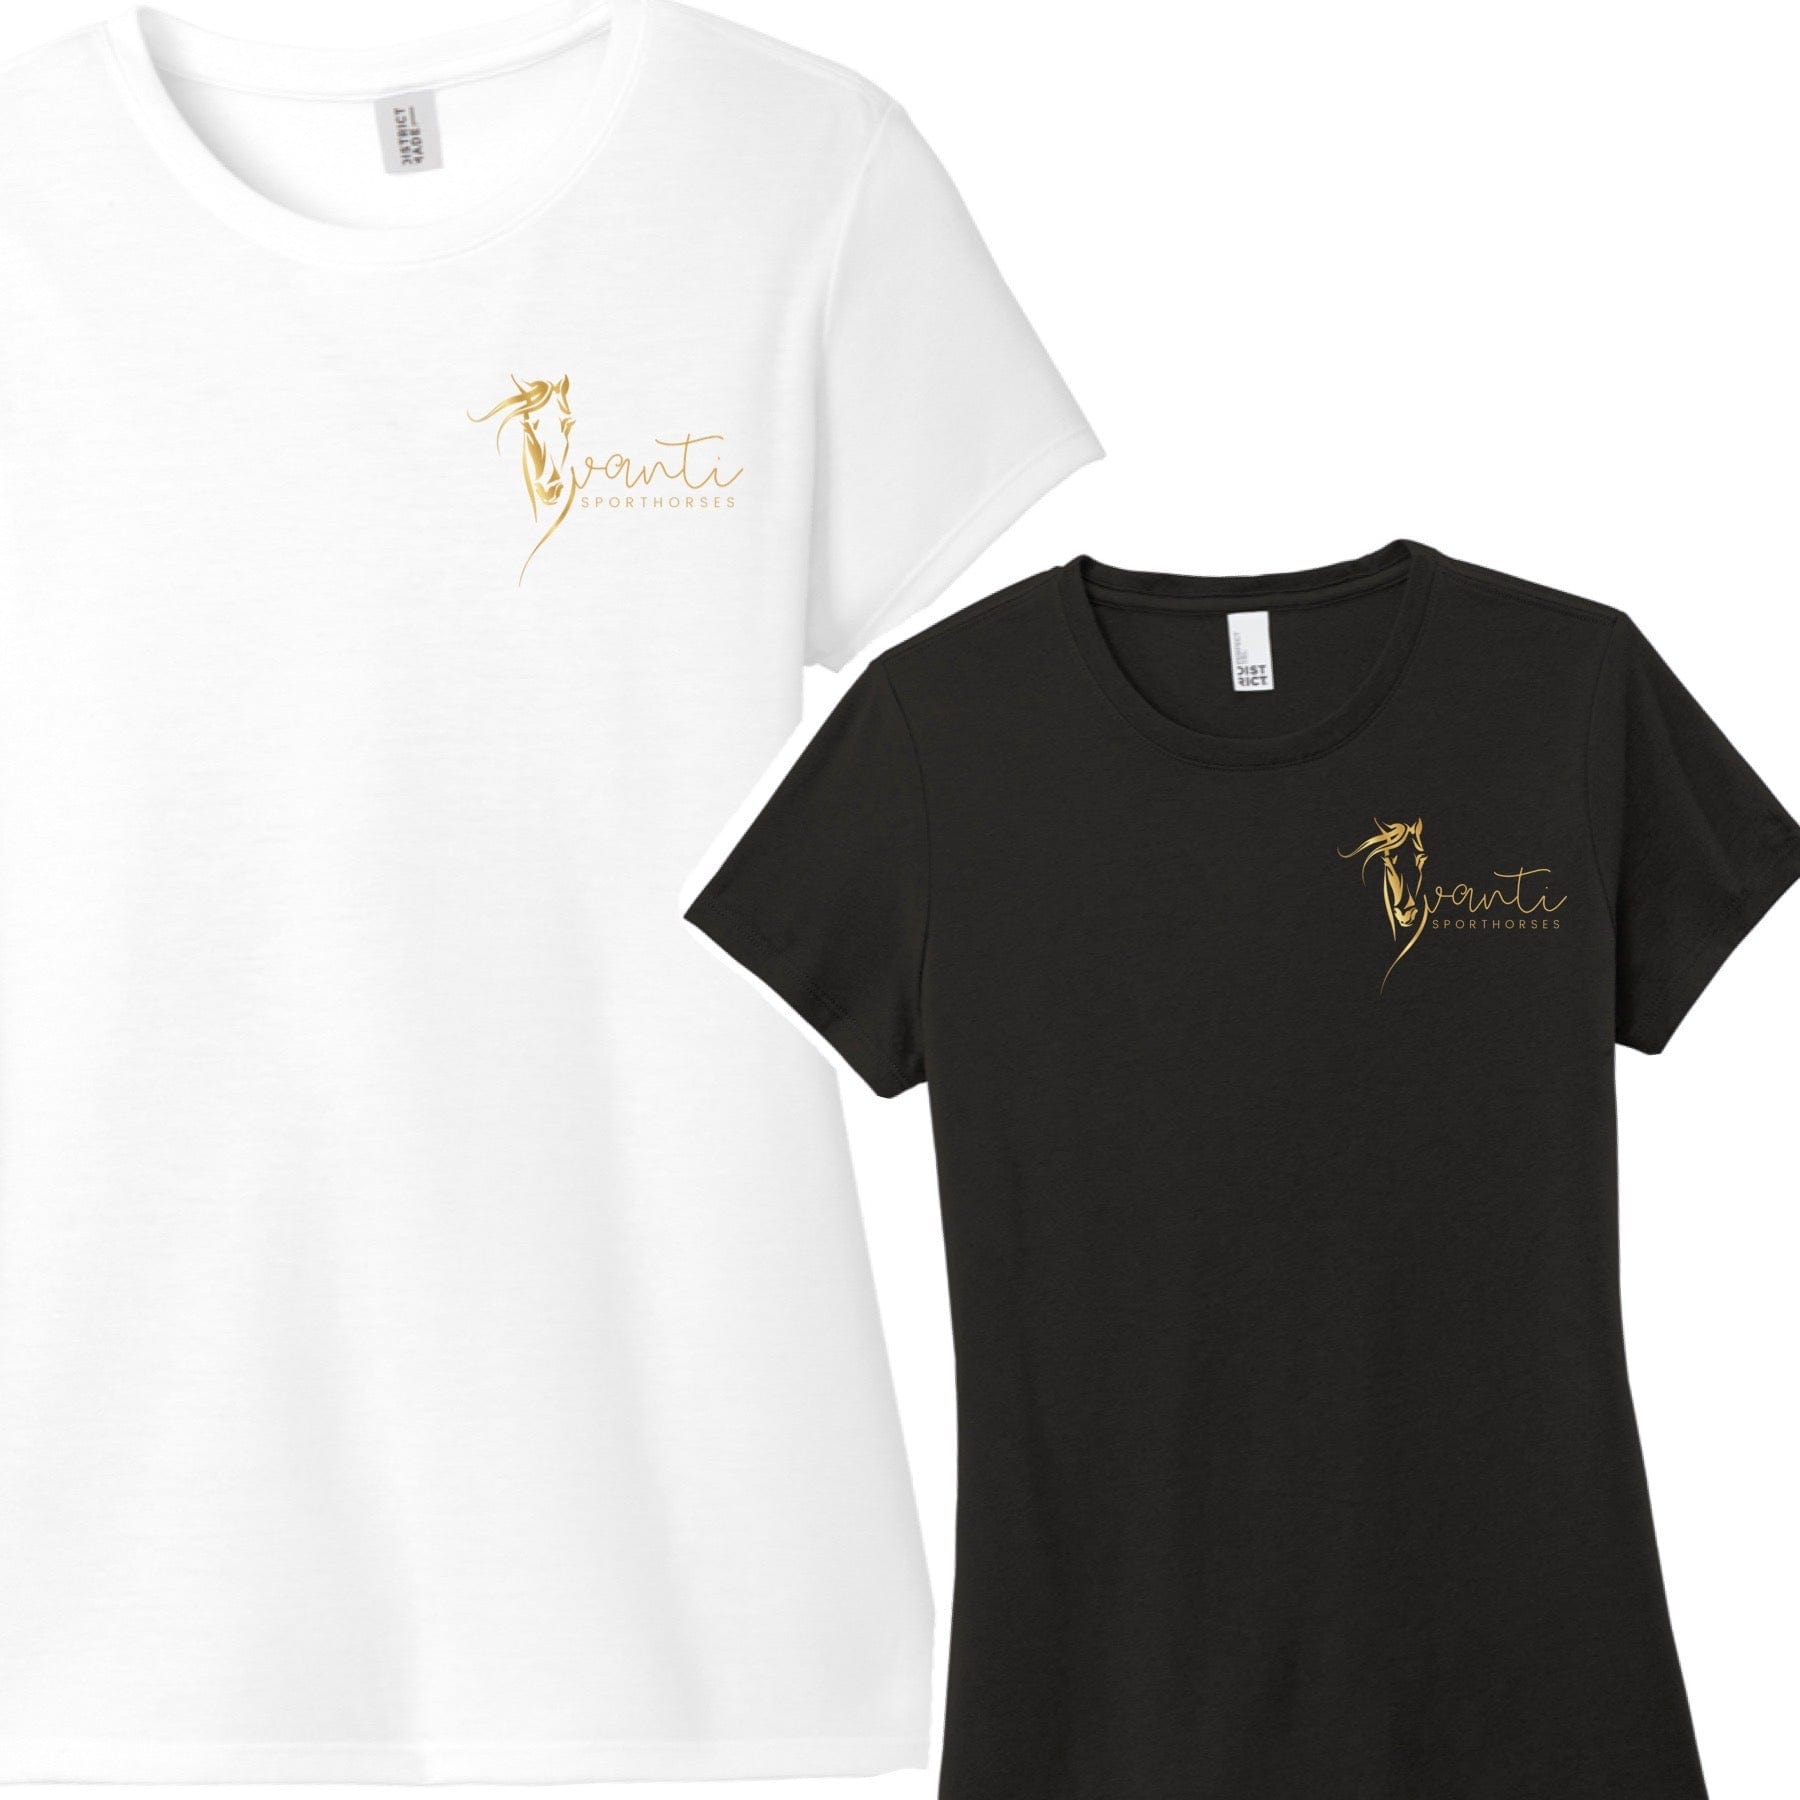 Equestrian Team Apparel Avanti Sport Horses Tee Shirt equestrian team apparel online tack store mobile tack store custom farm apparel custom show stable clothing equestrian lifestyle horse show clothing riding clothes horses equestrian tack store